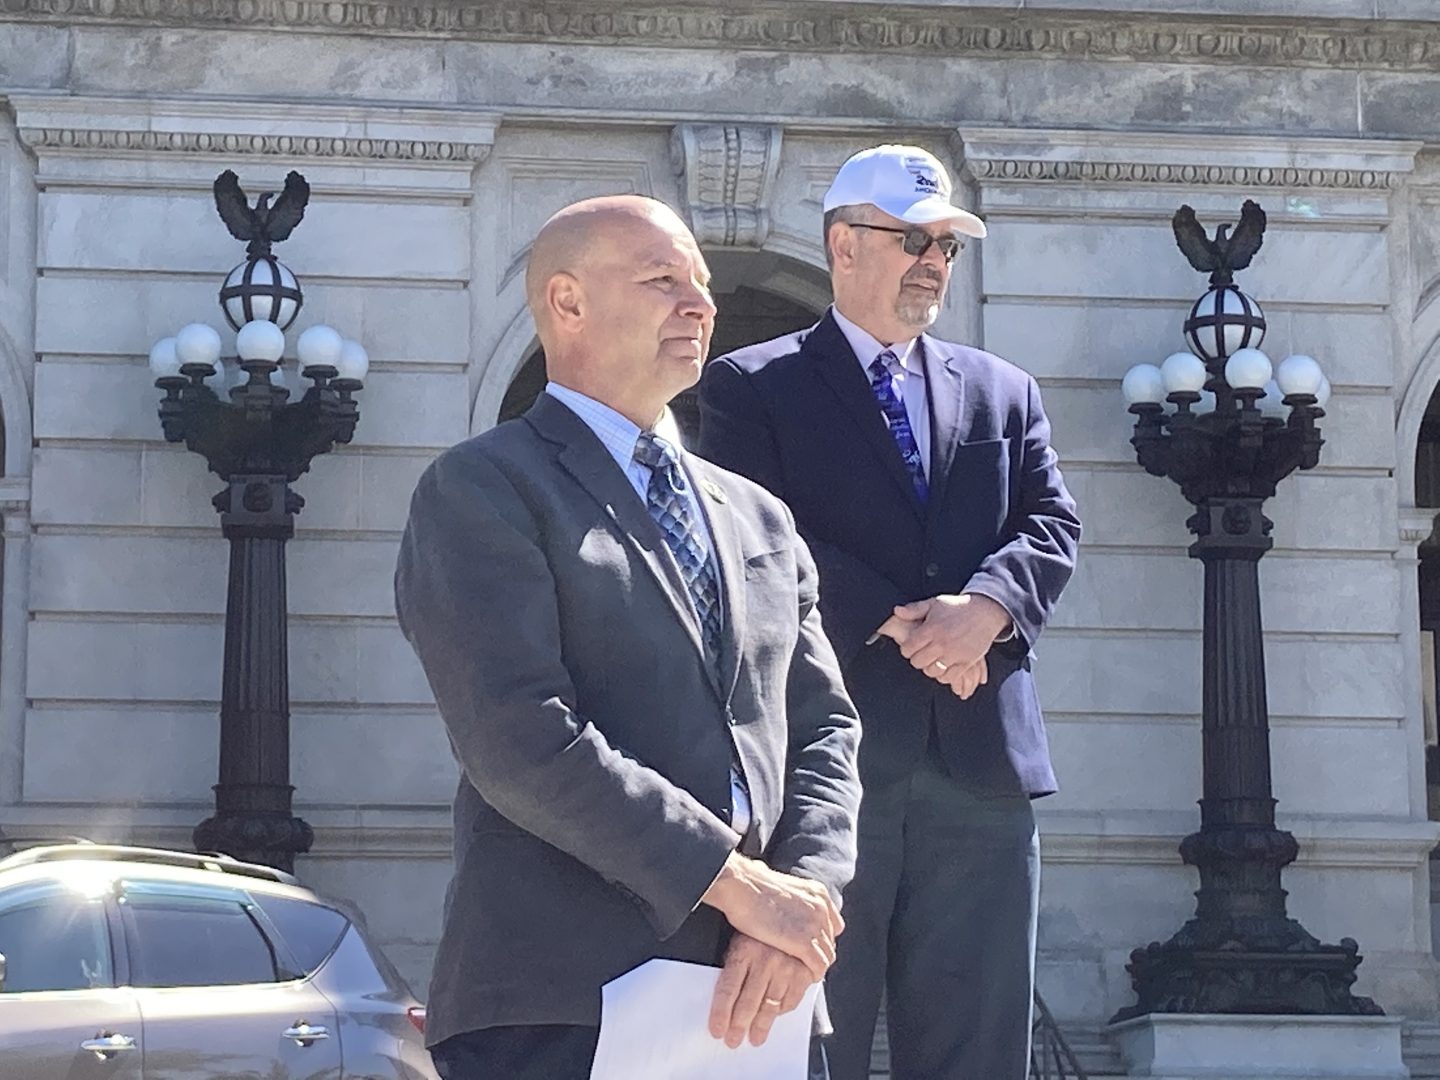 At left, state Sen. Doug Mastriano (R-Adams) watches as a speaker gives remarks at a rally supporting a bill aiming to make new federal firearm regulations enacted after Dec. 2020 unenforceable in Pennsylvania on May 12, 2021. At right in the background, state Sen. Cris Dush (R-Cameron).